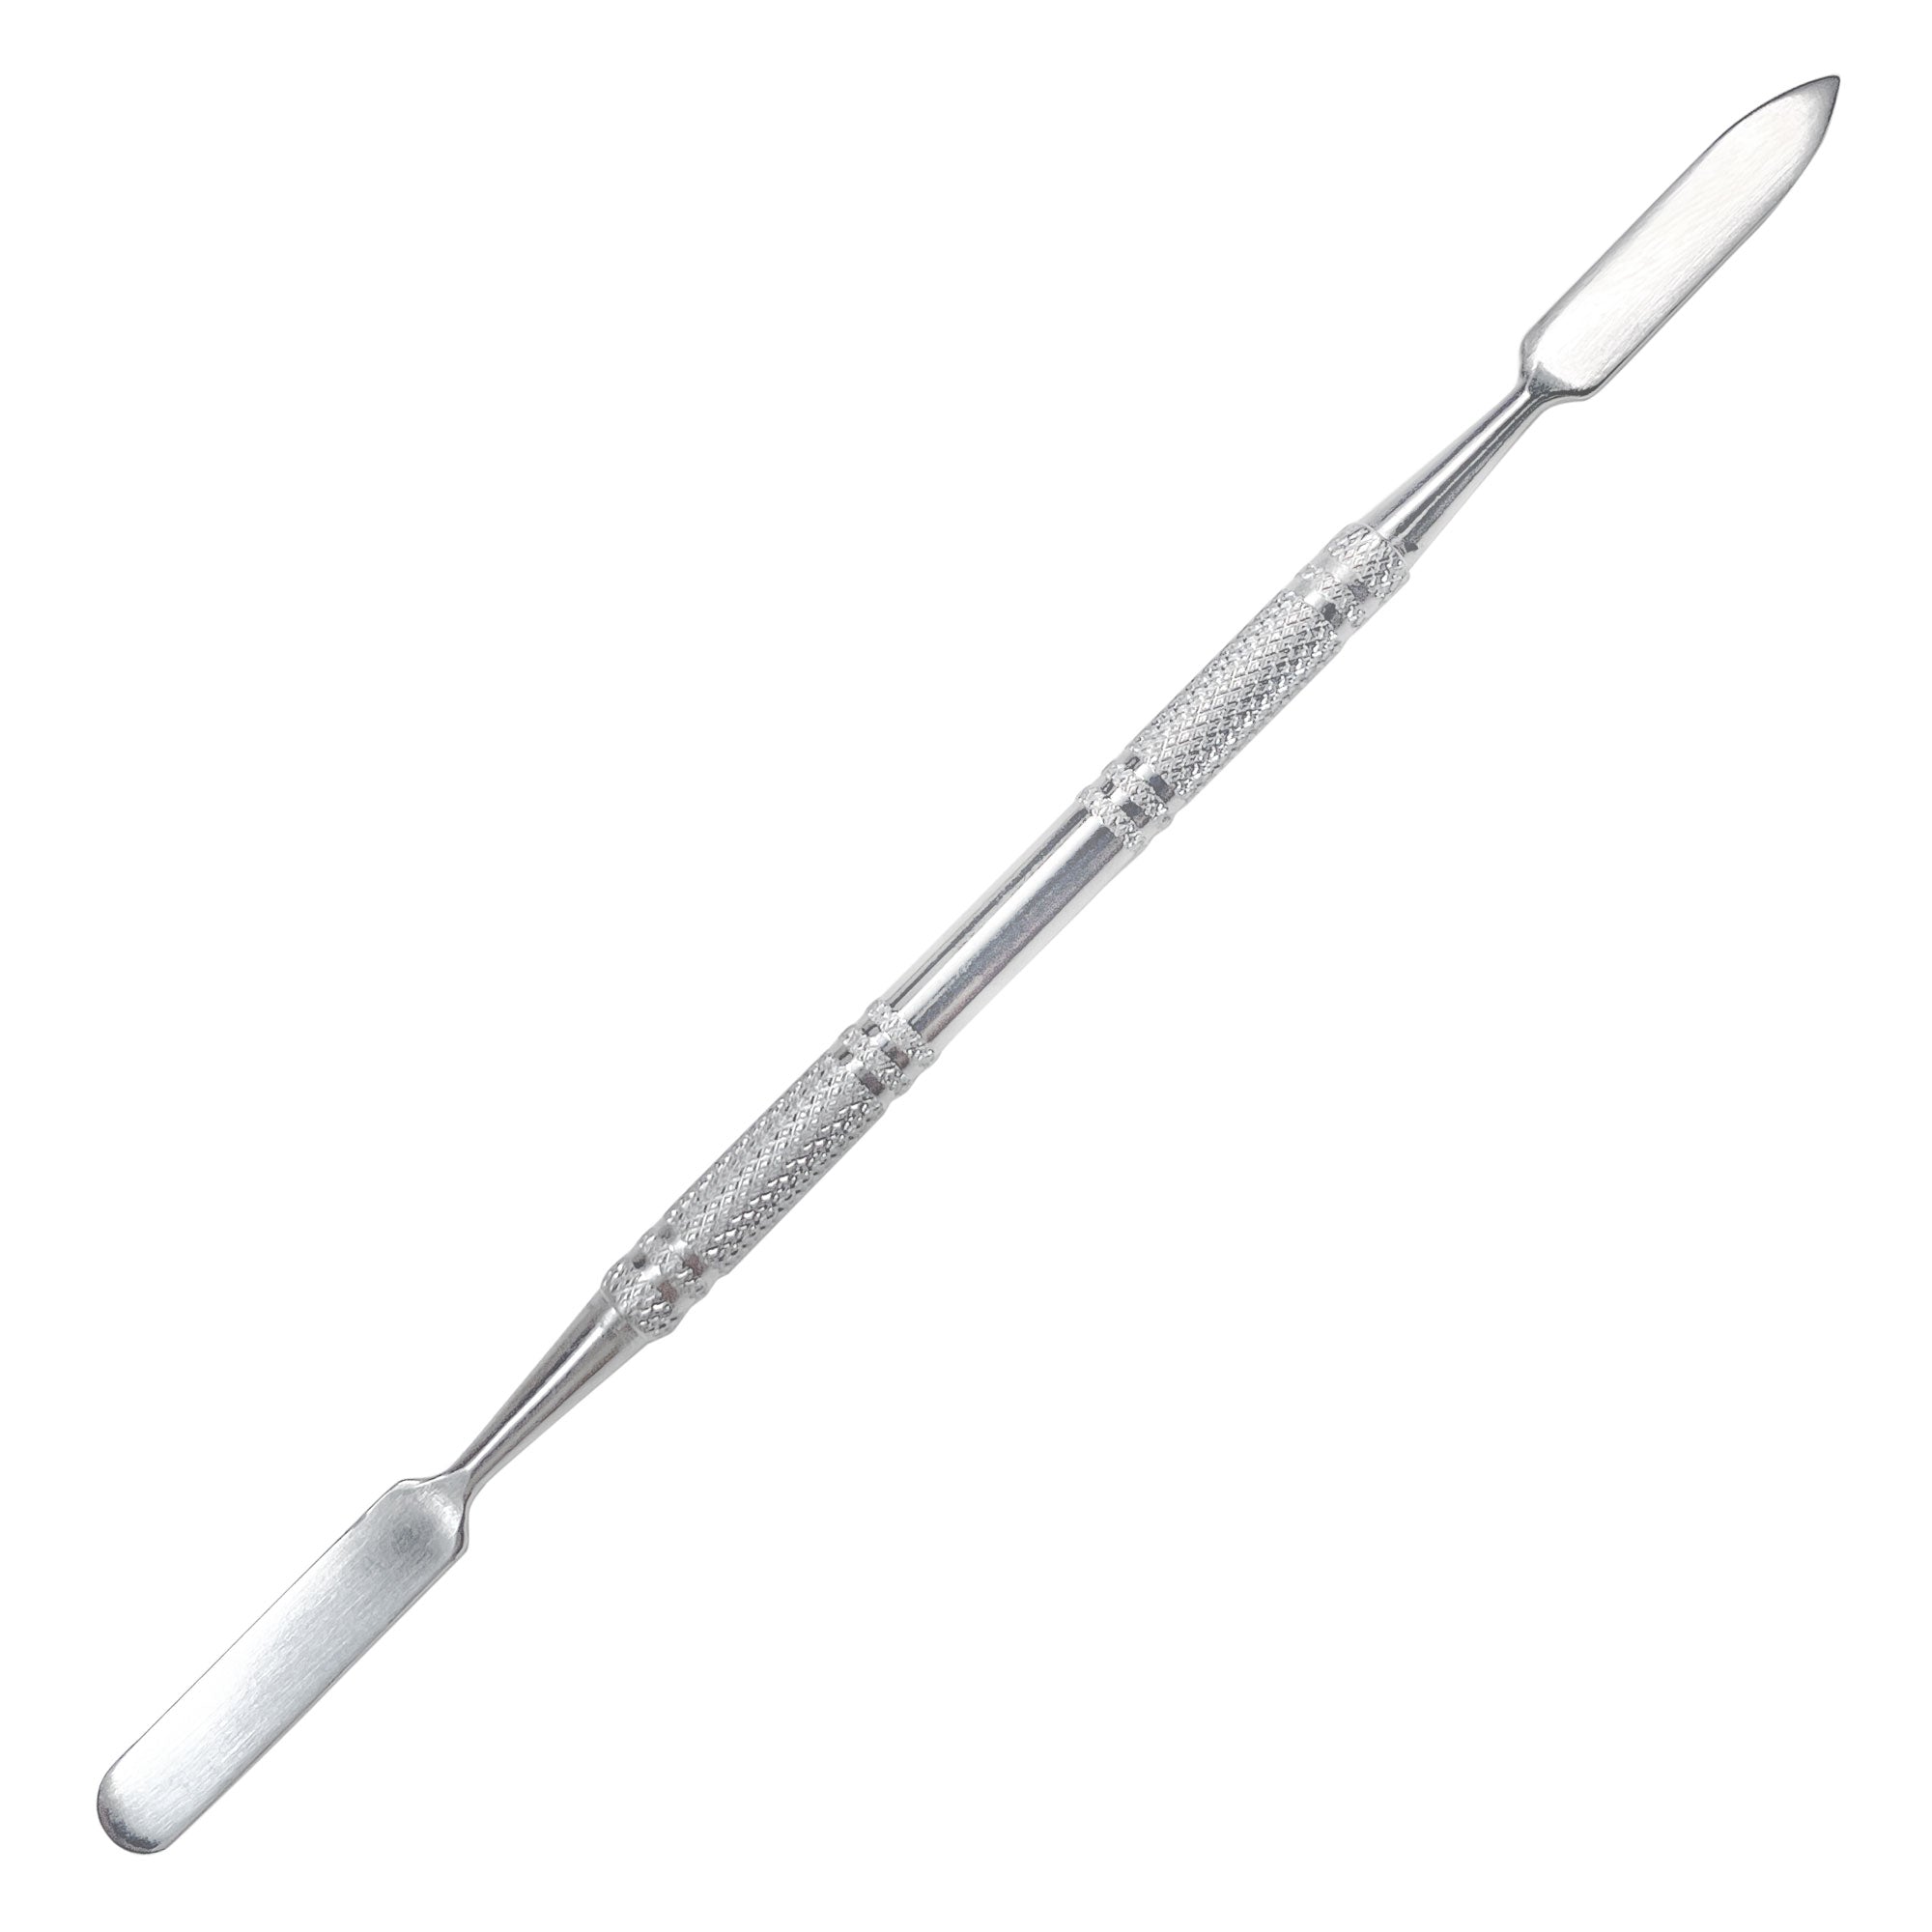 Cuticle Pusher and Spoon Nail Cleaner - Professional Grade Stainless Steel  Cuticle Remover and Cutter - Durable Manicure and Pedicure Tool - for  Fingernails and Toenails - Walmart.com